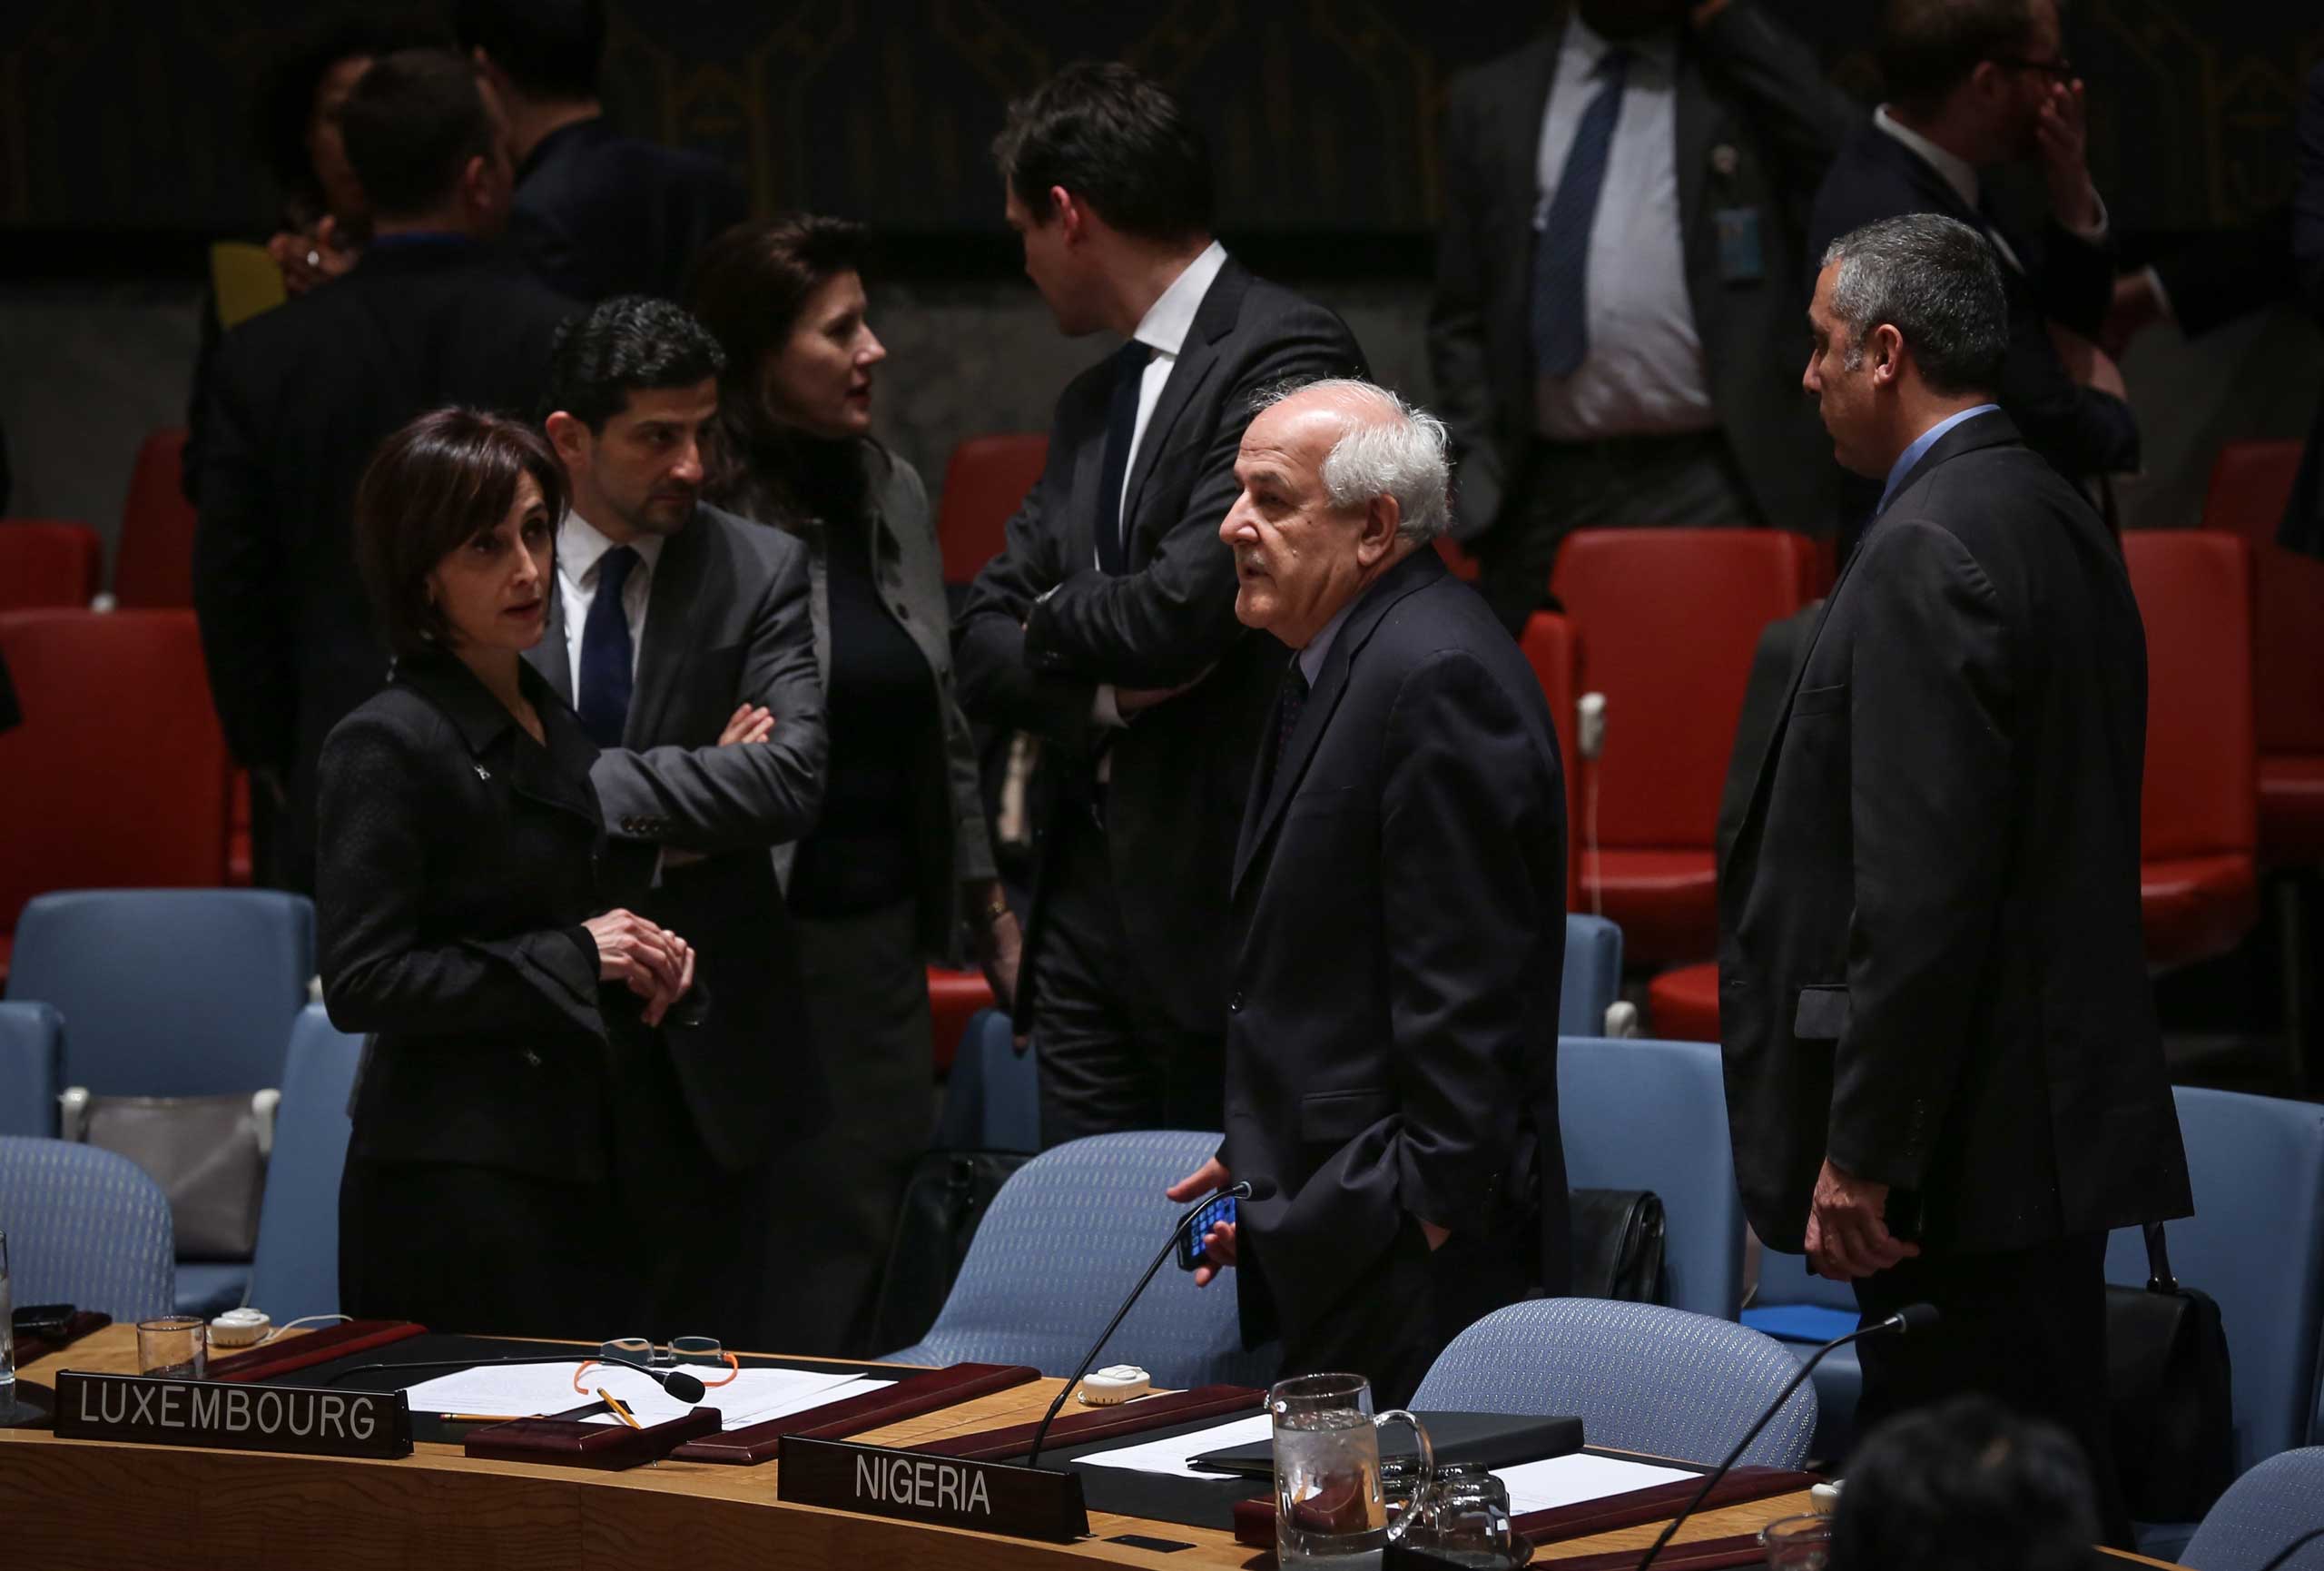 UN Security Council rejects draft resolution on Palestinian statehood